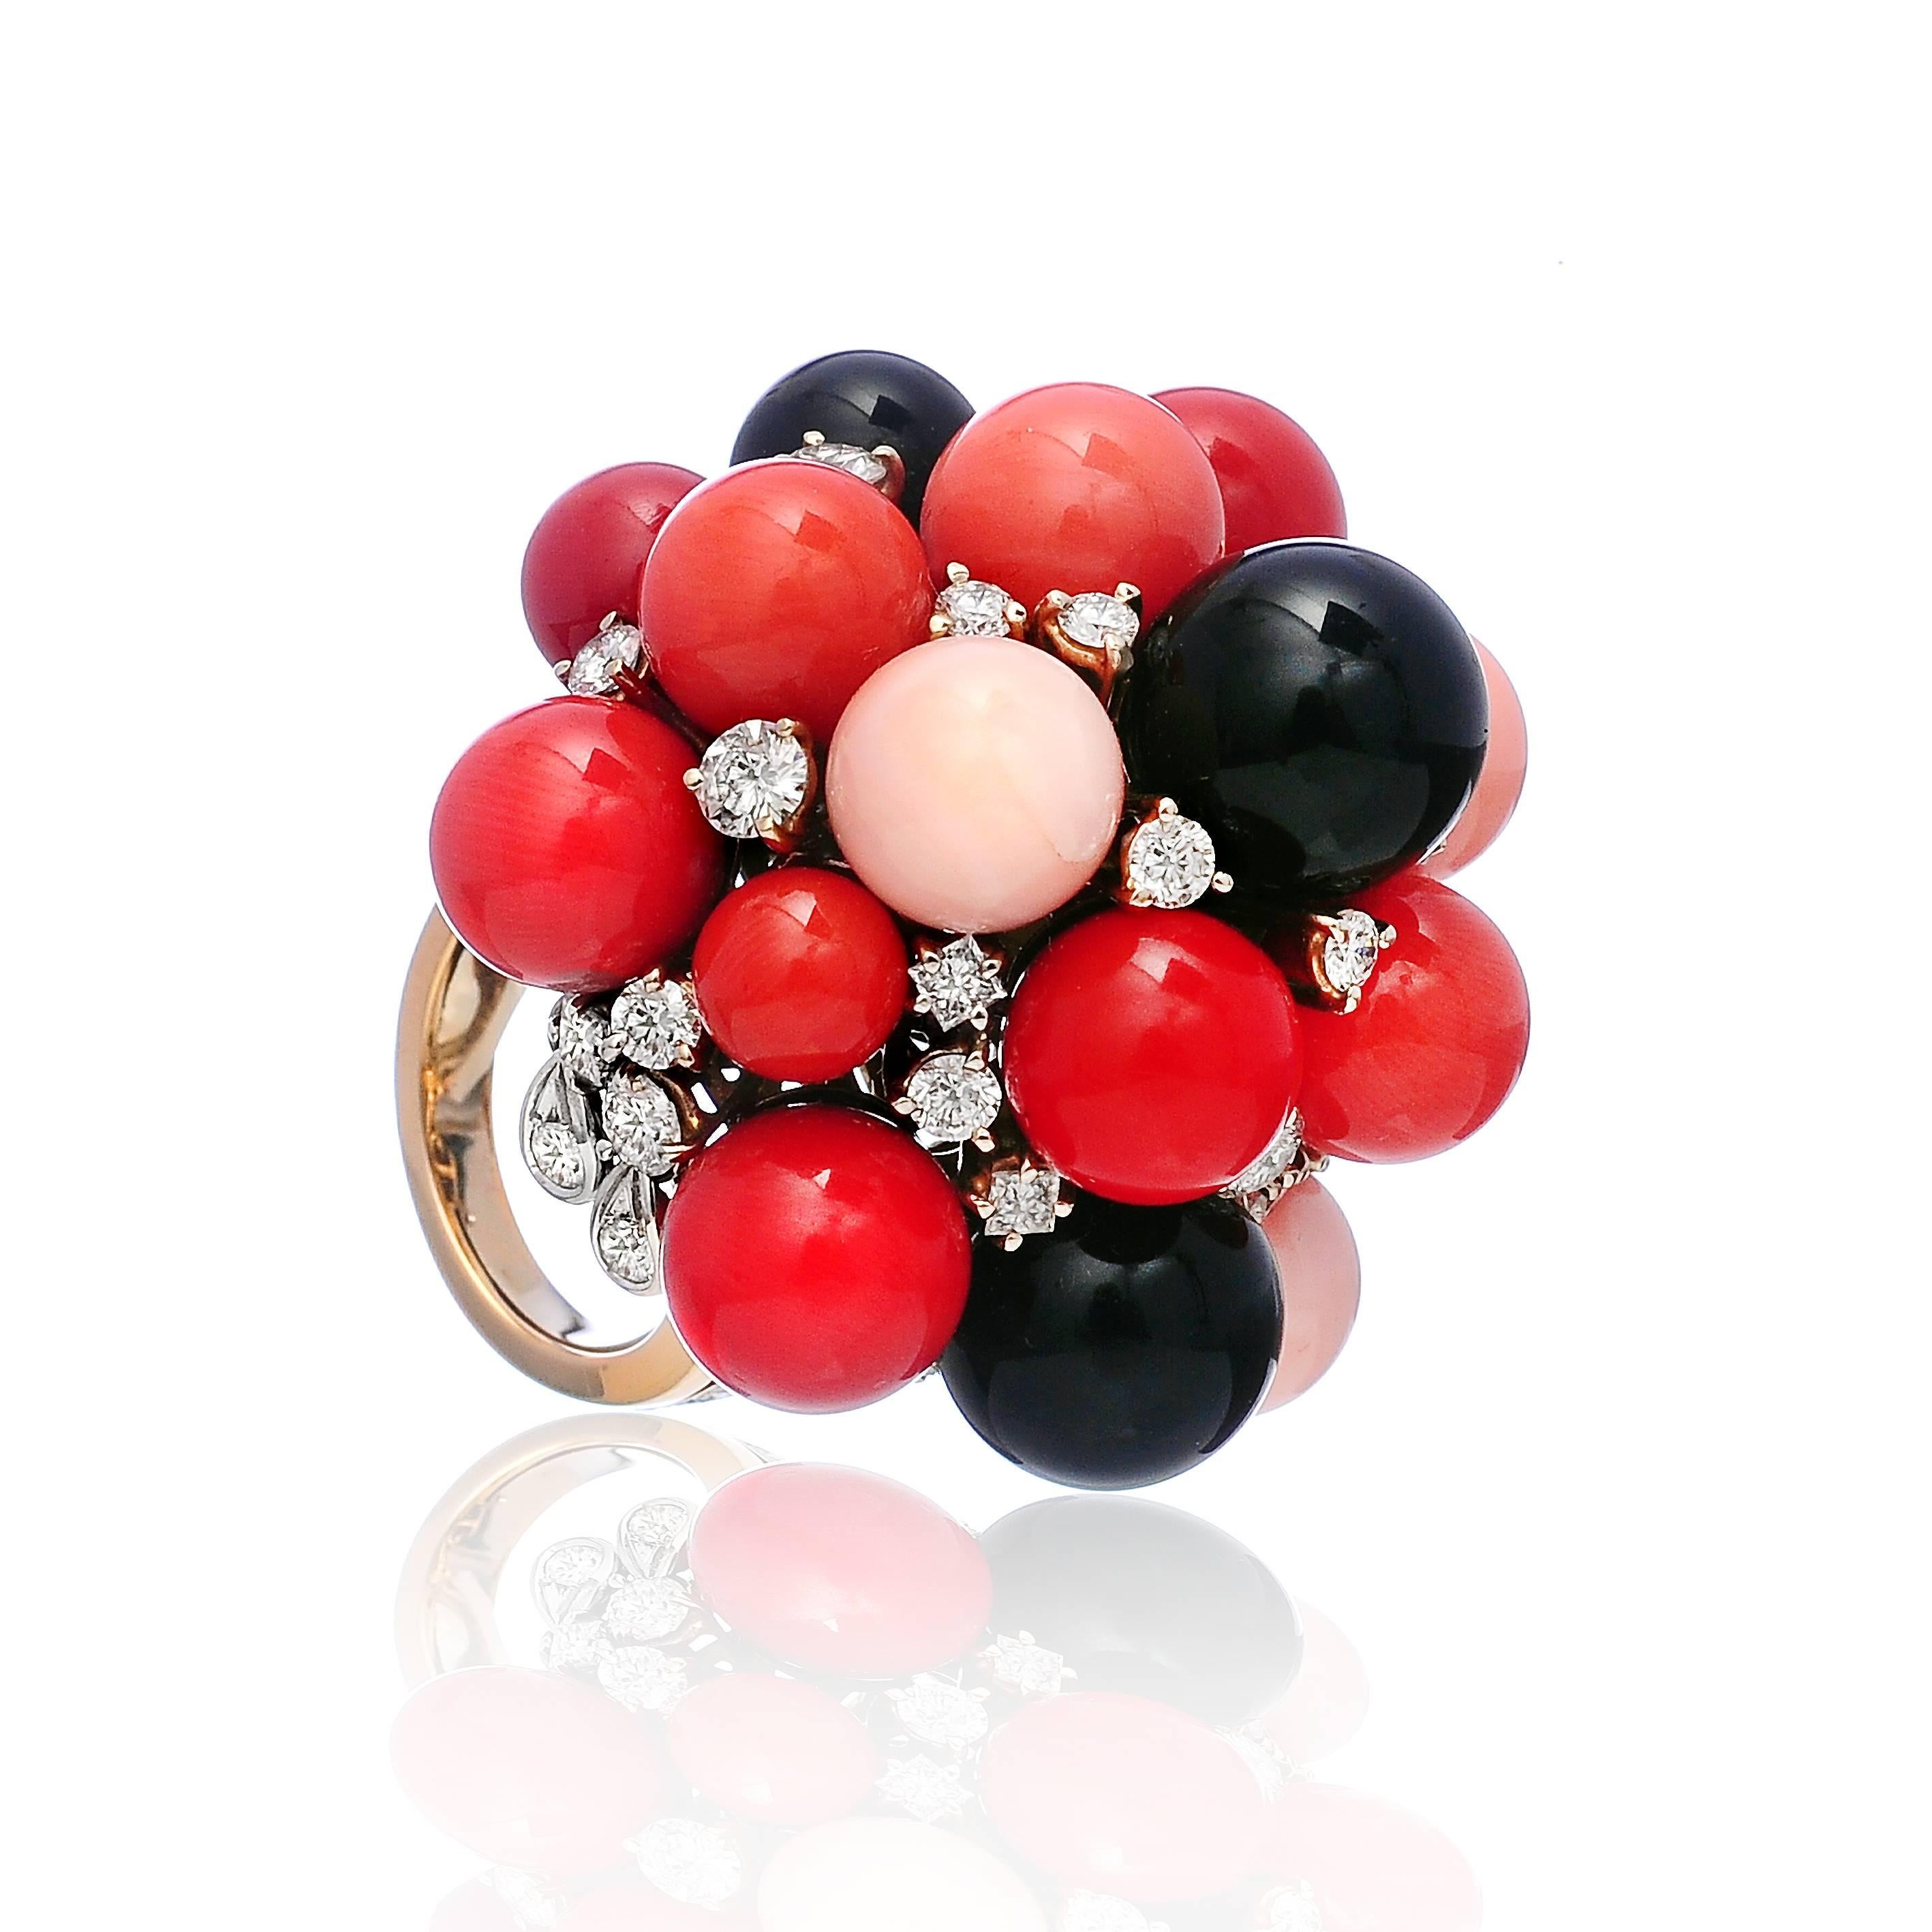 White and yellow 18k gold, Coral, Black Jade and Diamond Ring from the 50th. Unique piece.
